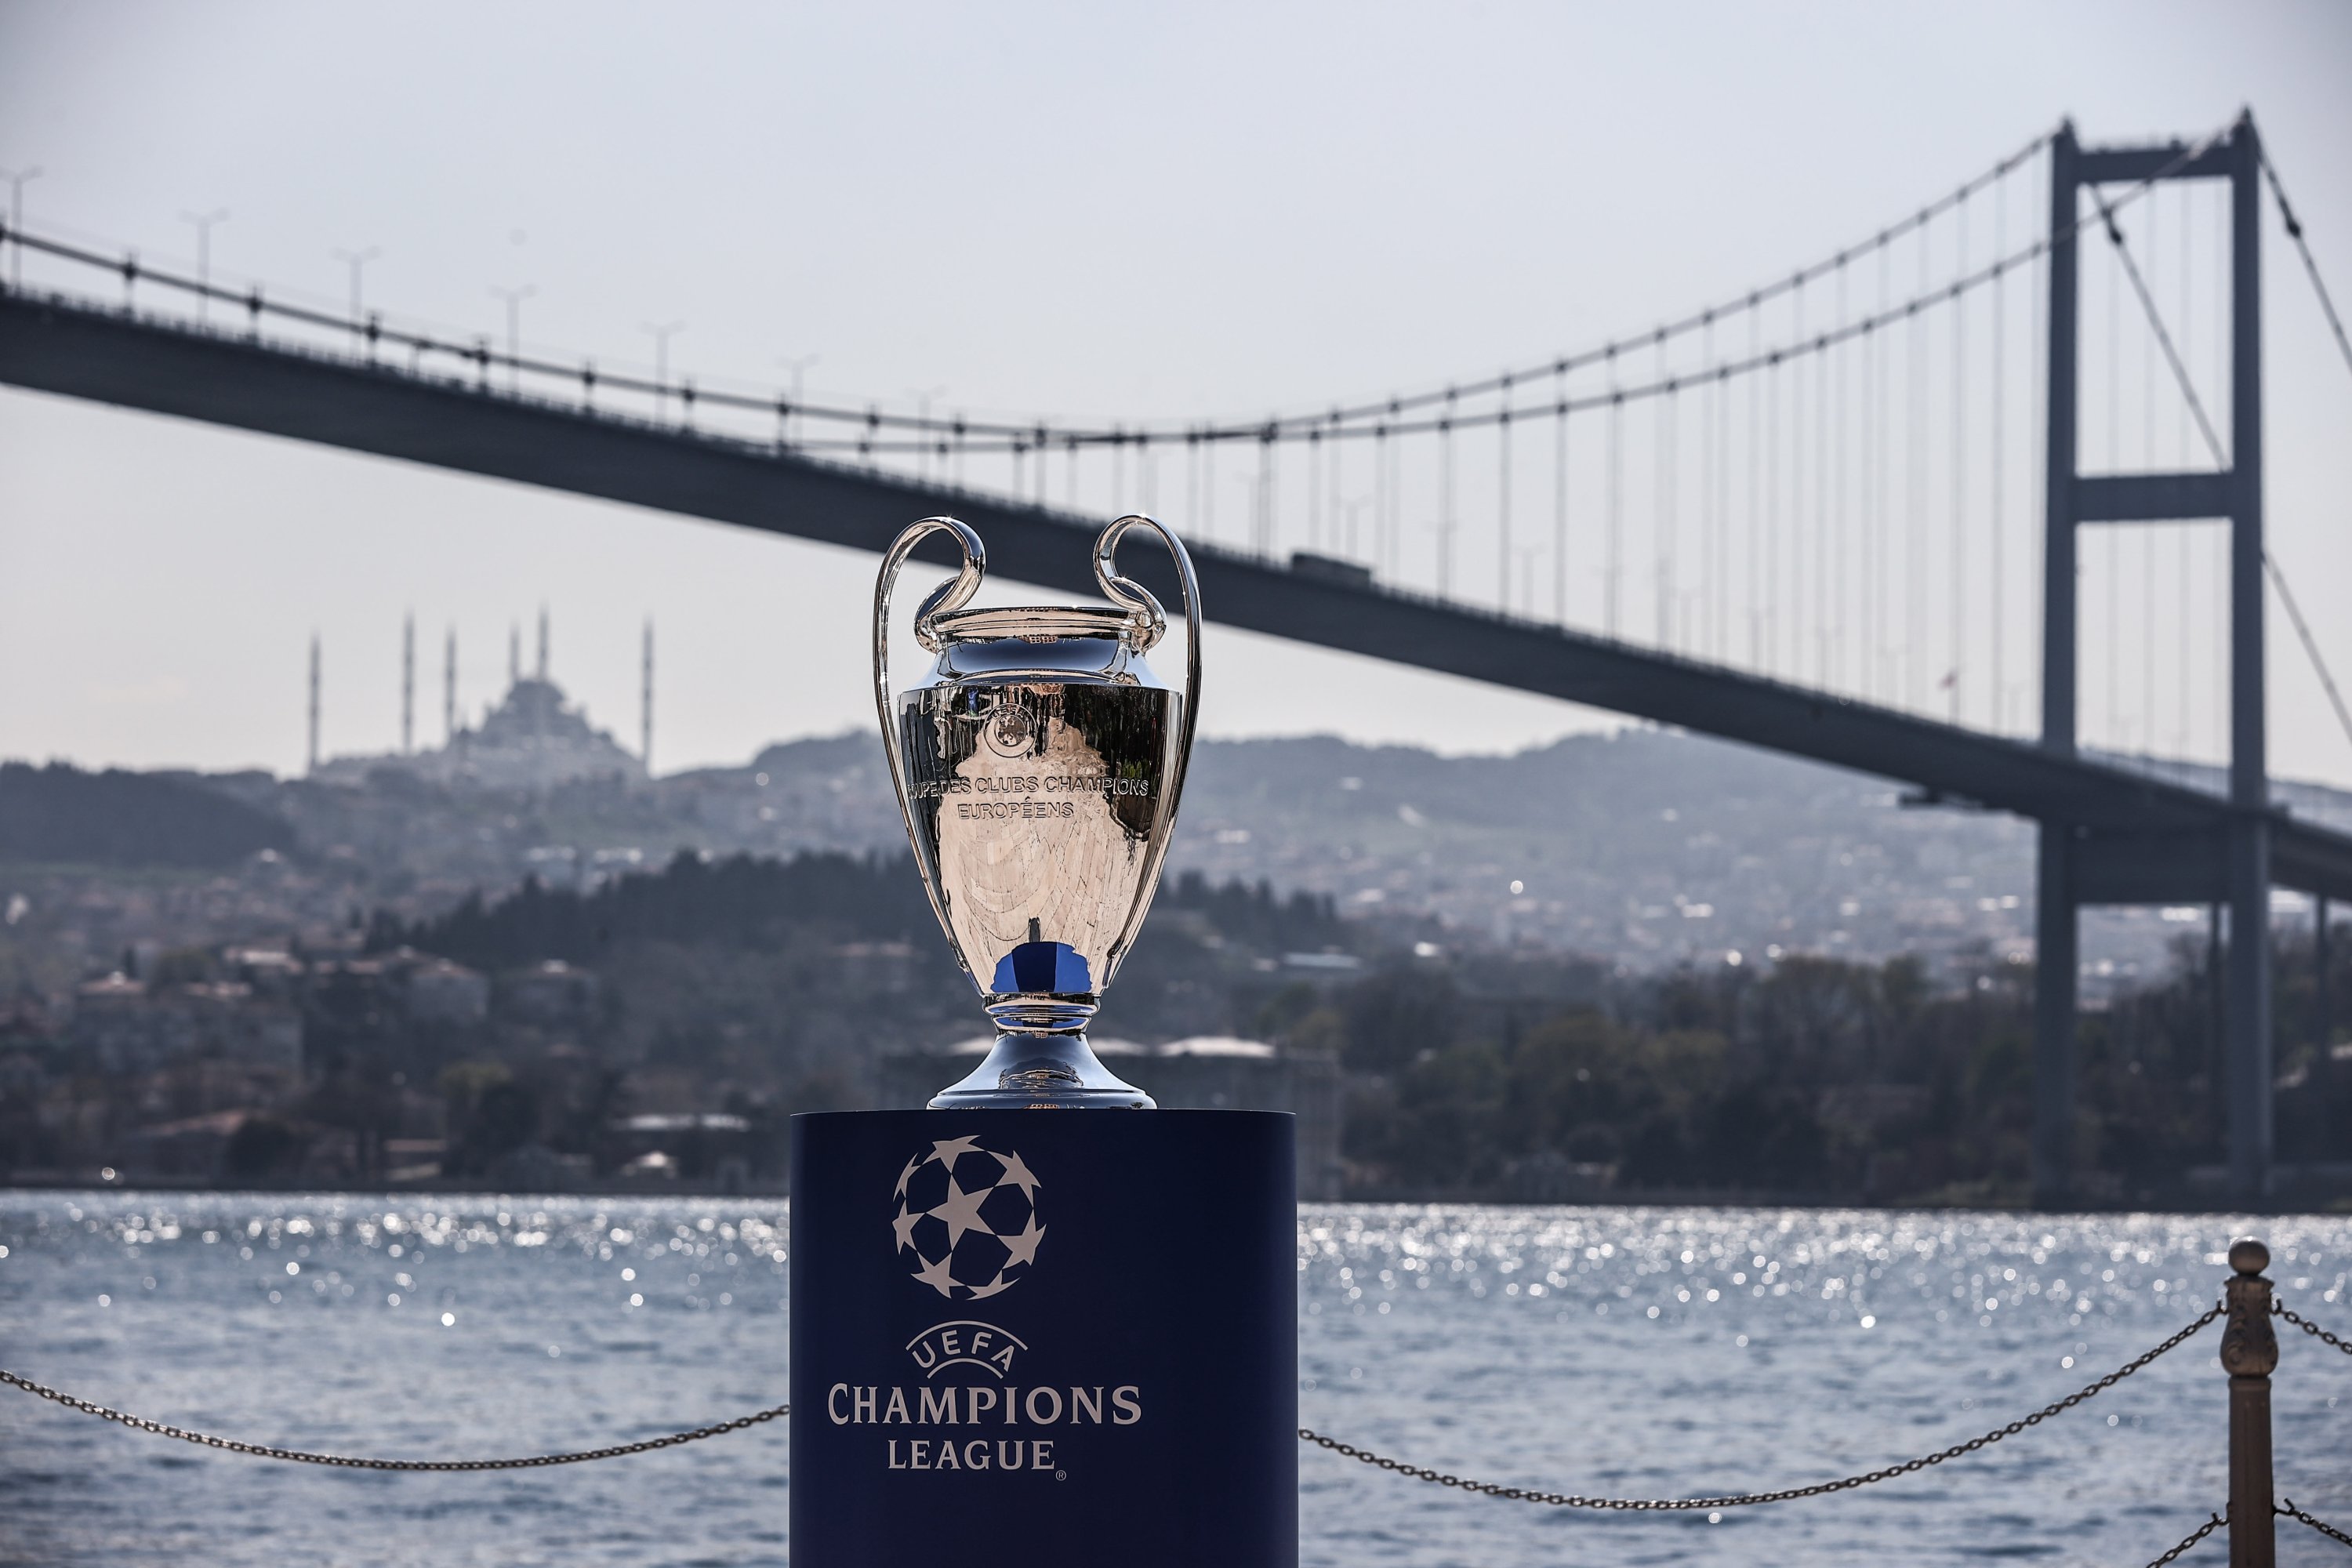 UEFA Champions League trophy arrives in Istanbul ahead of final Daily